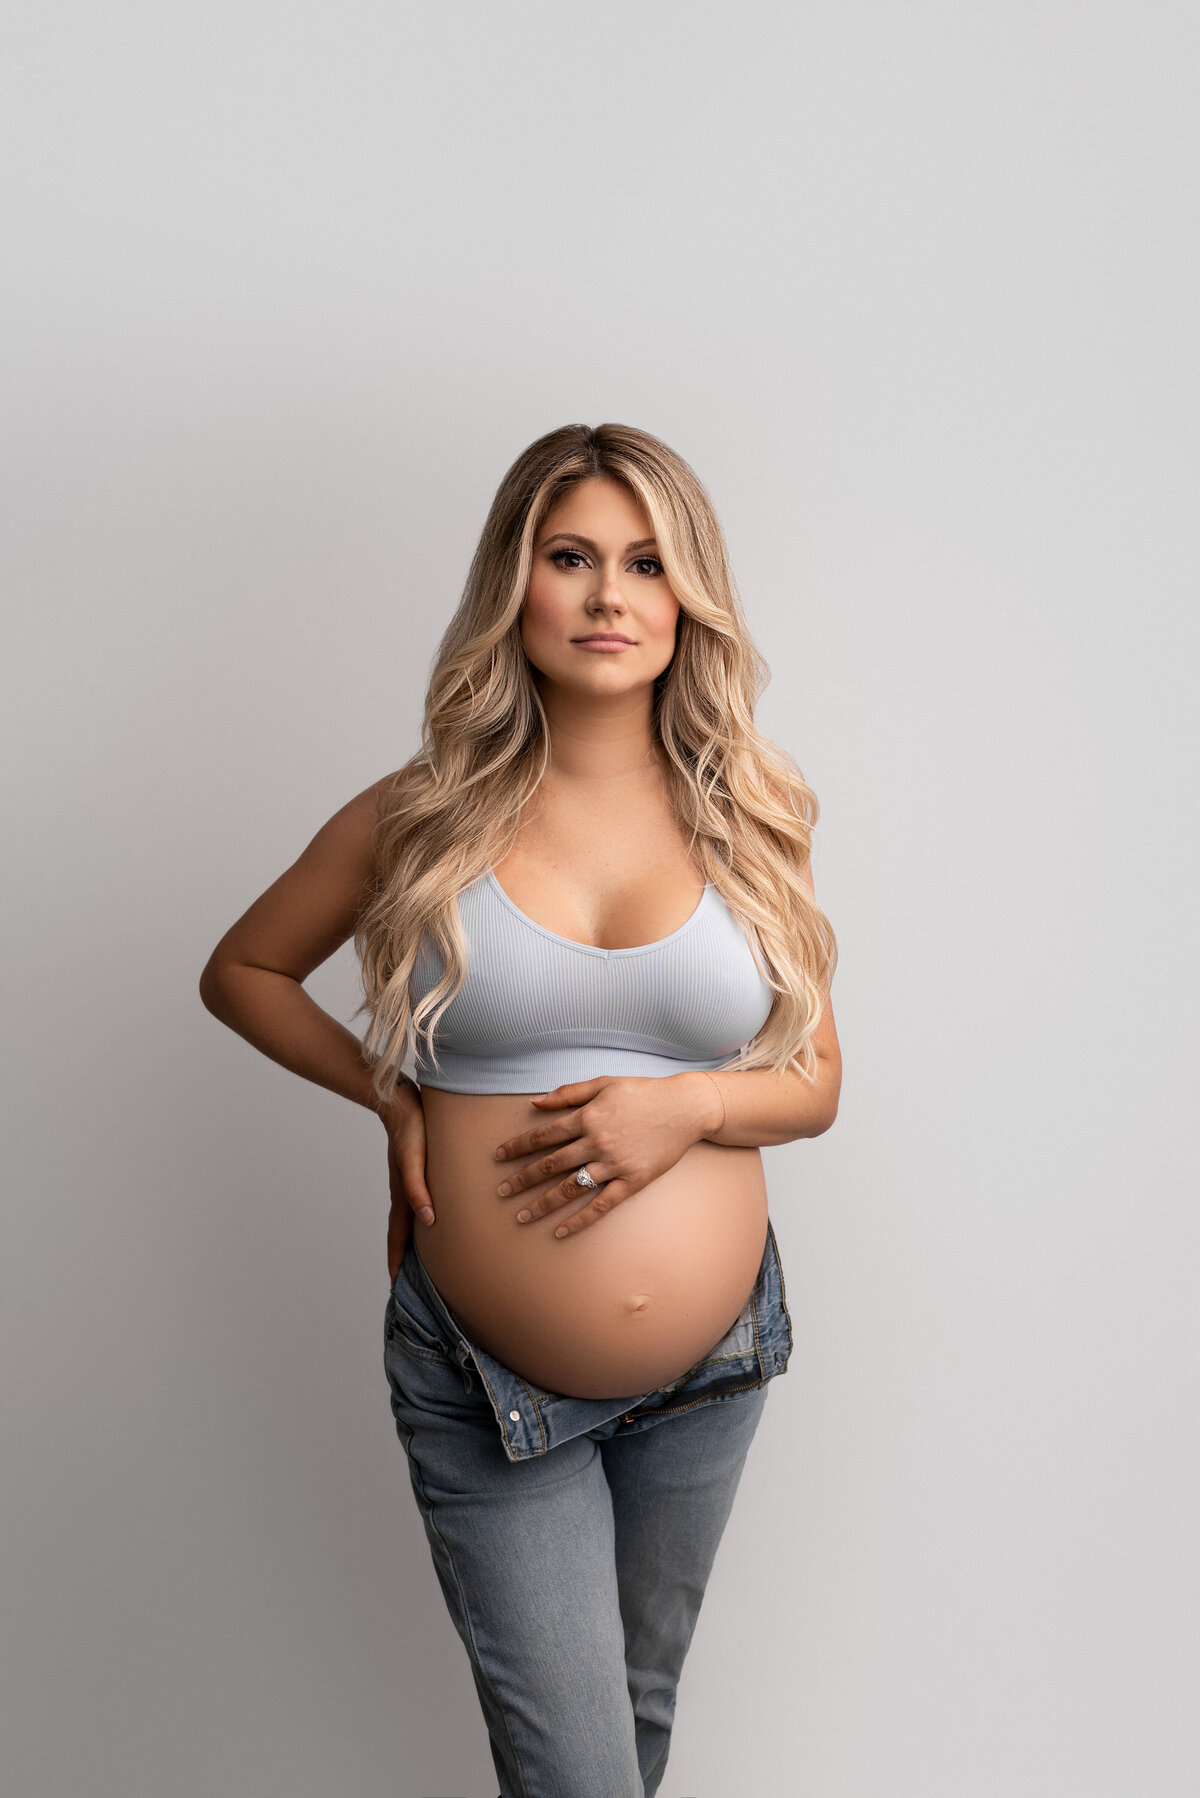 New Jersey's best maternity photographer Katie Marshall captures expectant mom for fine art maternity photos.